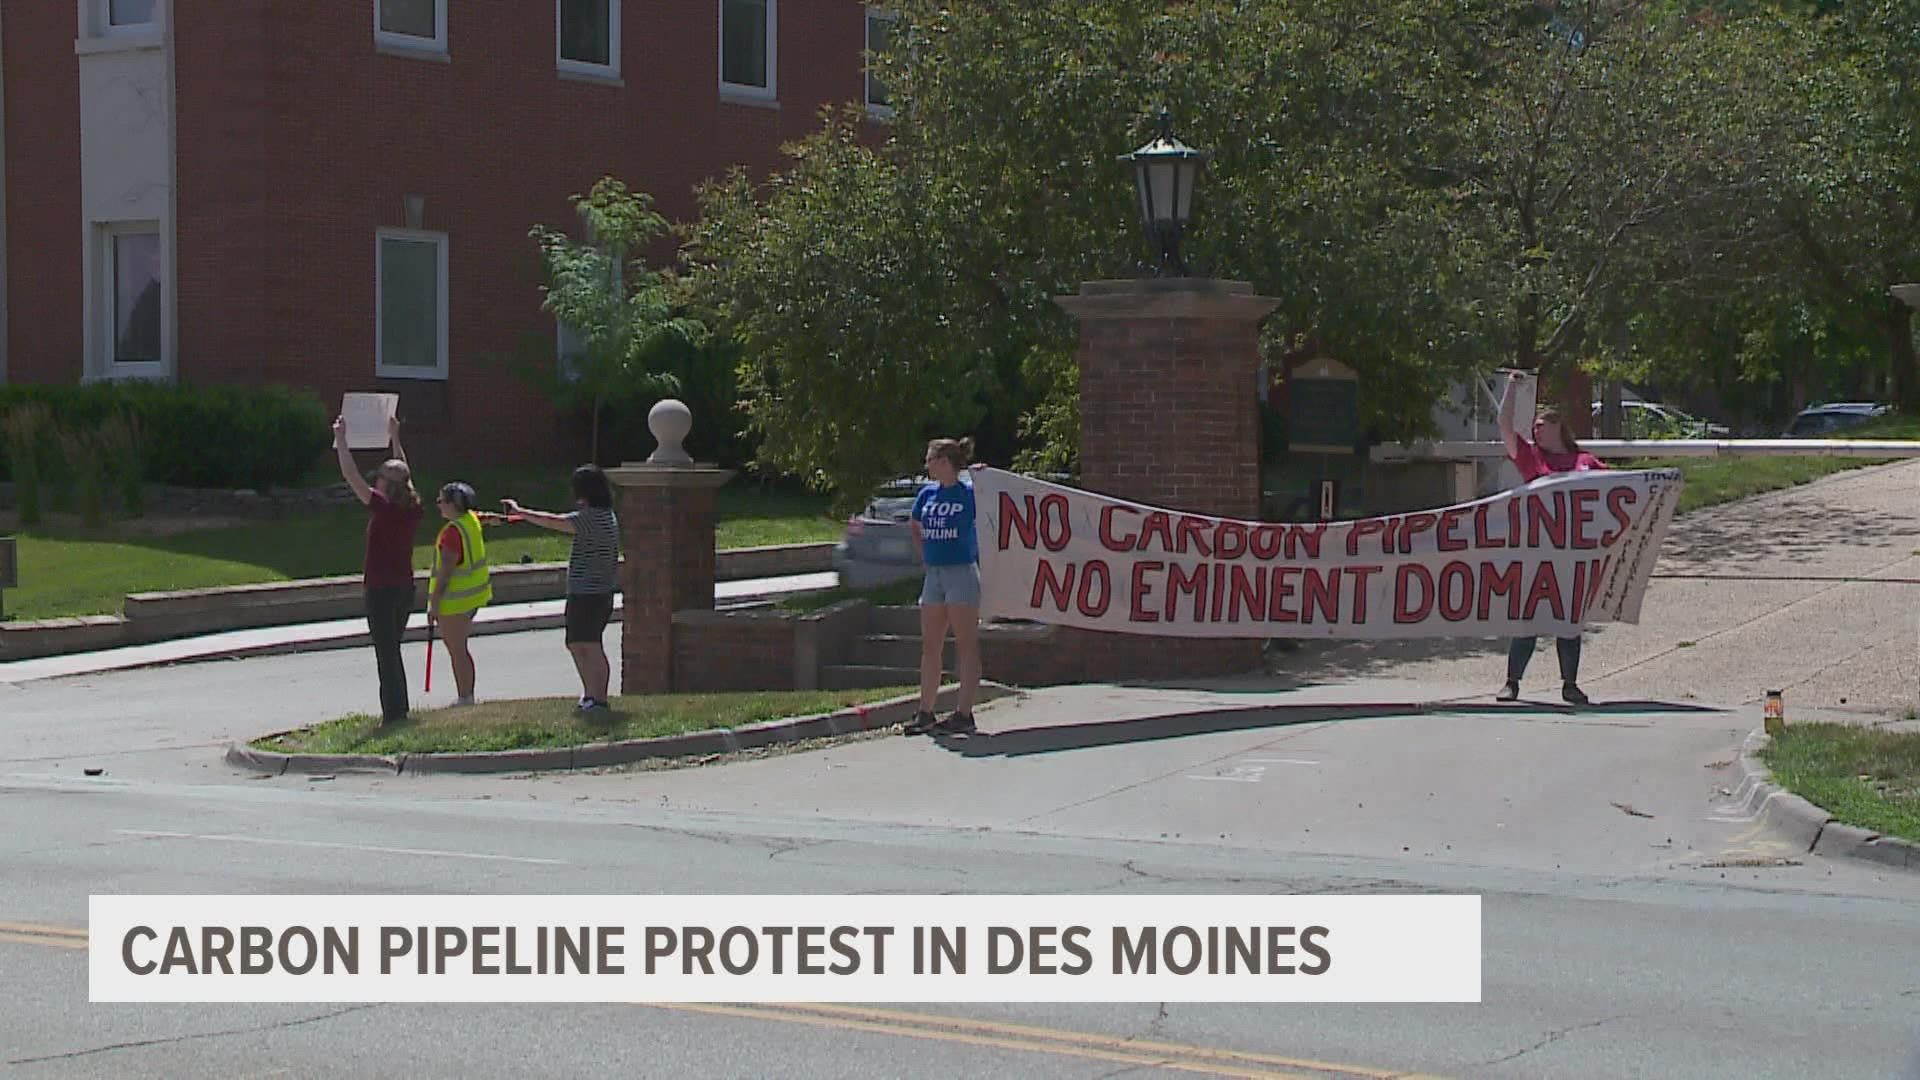 The rally comes a year after Summit Carbon Solutions announced a 2,000 mile pipeline that would go through five states, including Iowa.